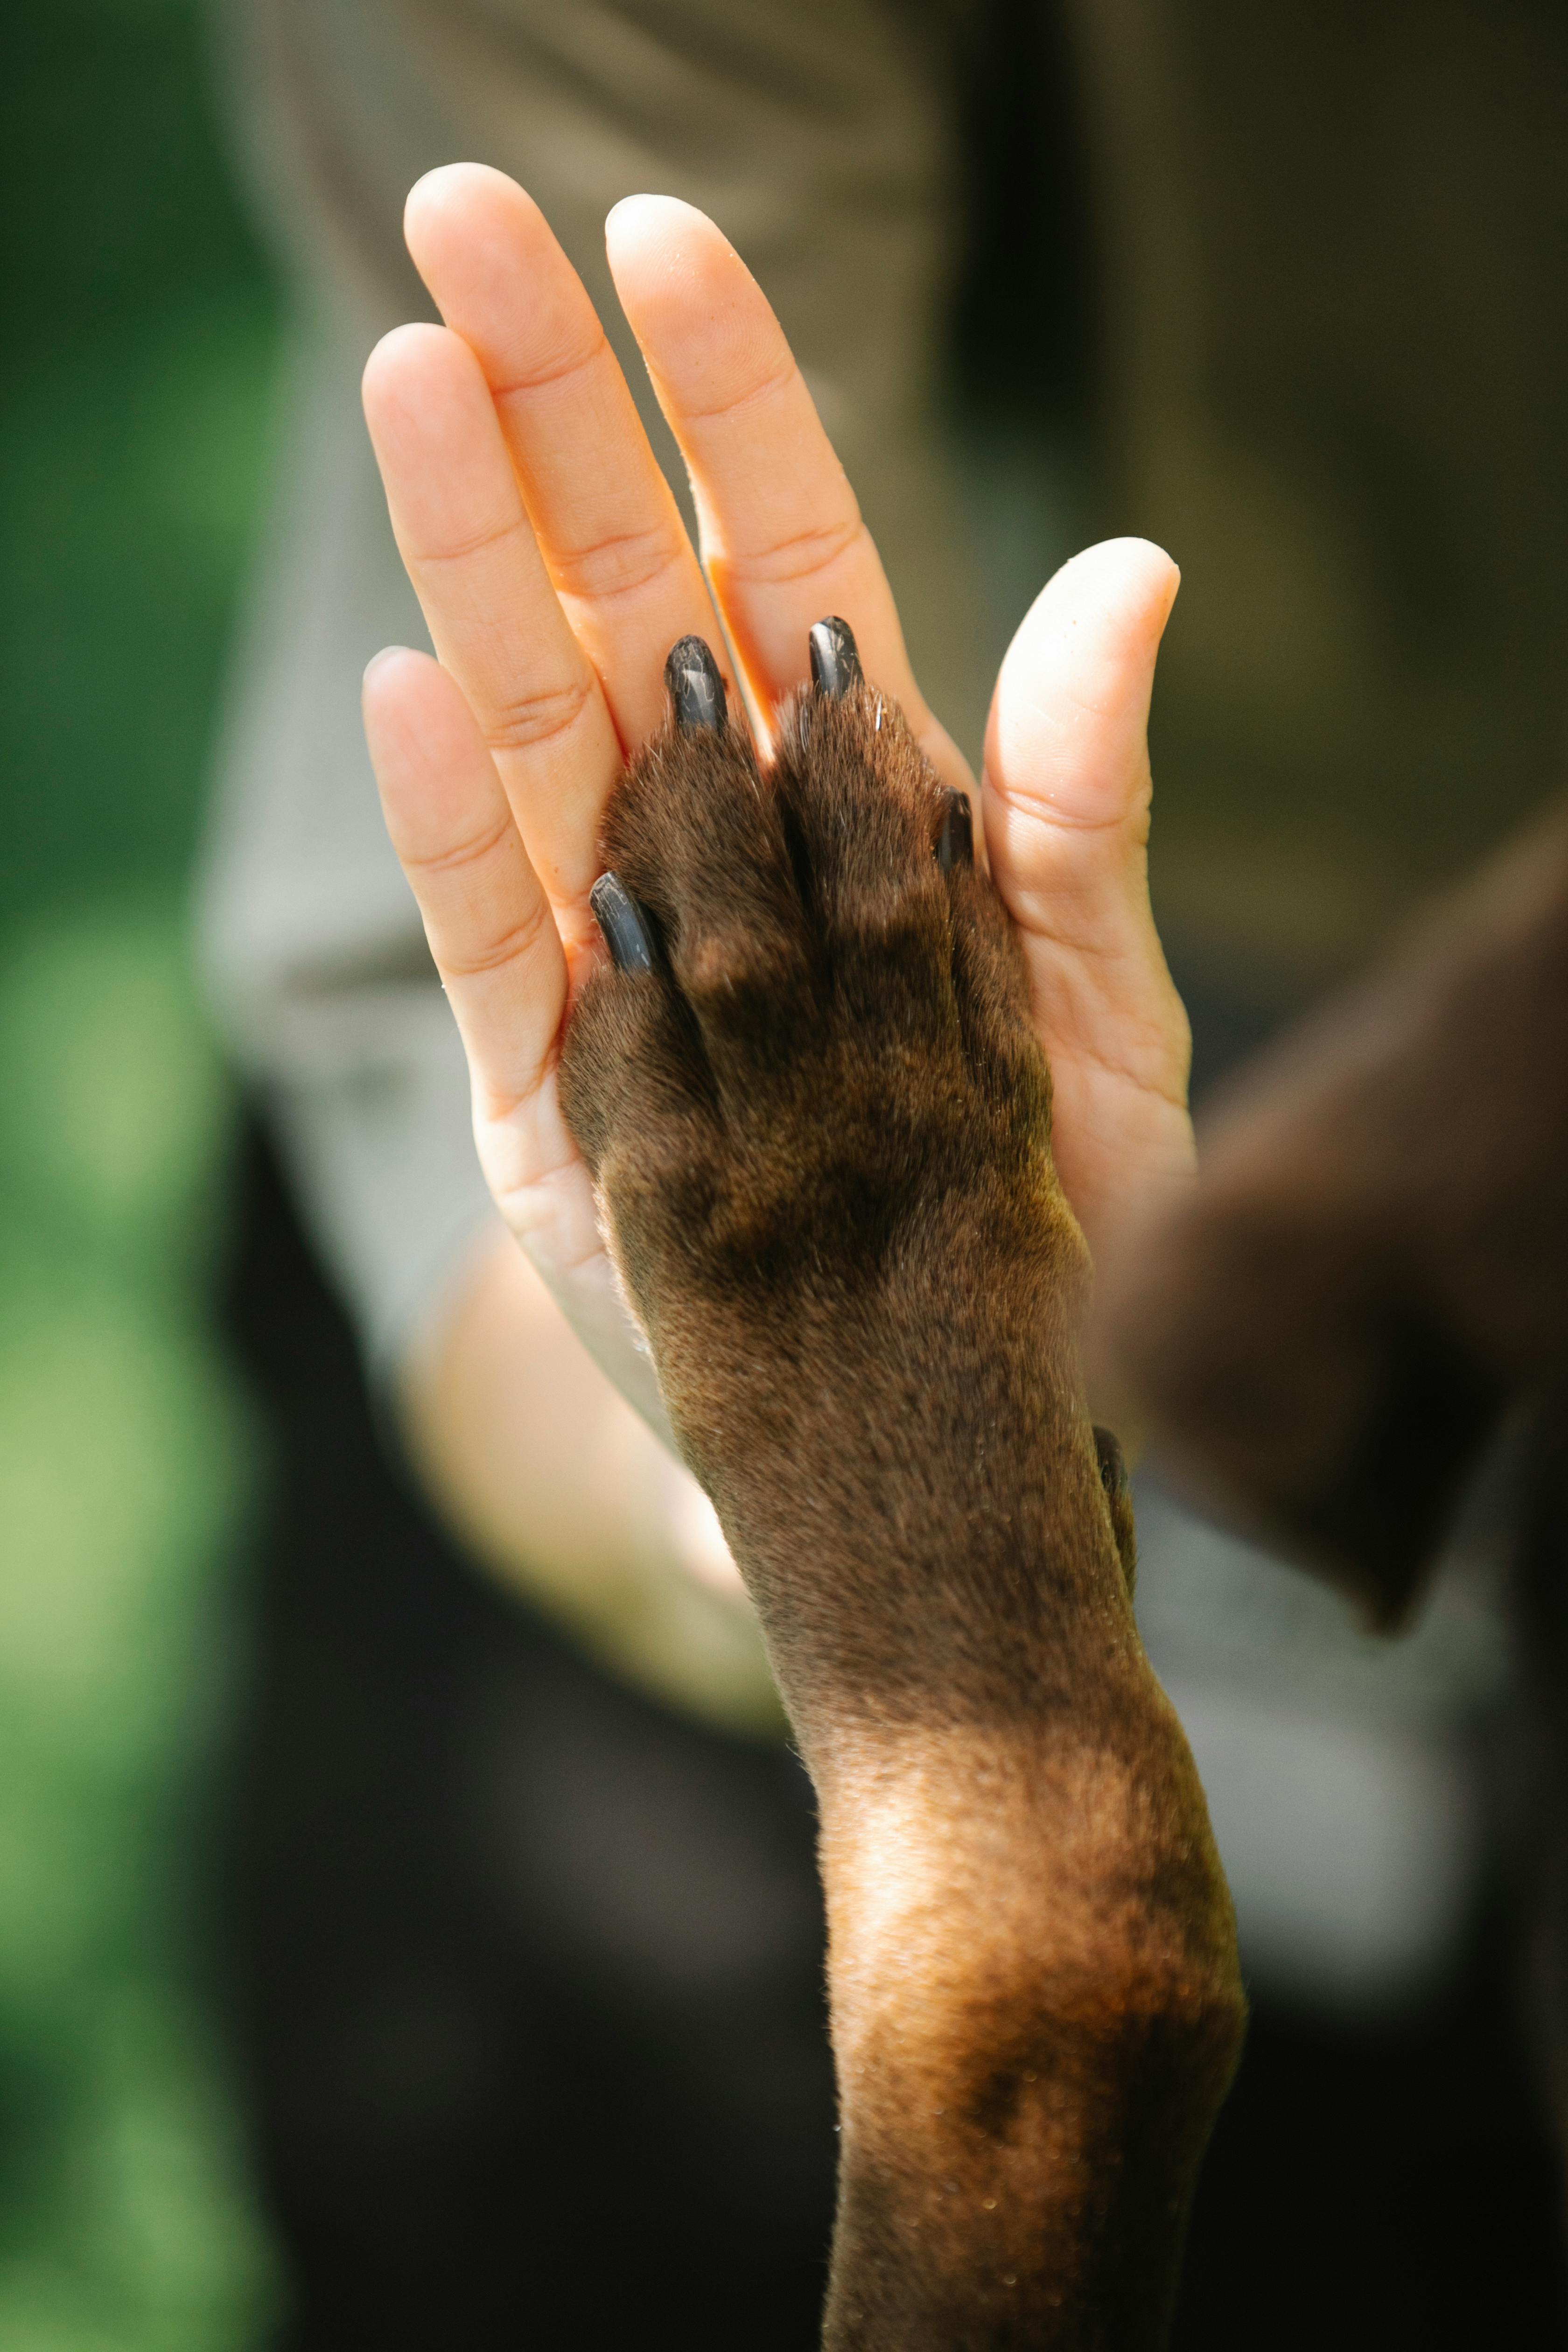 Dog owner's hand and dog's paw